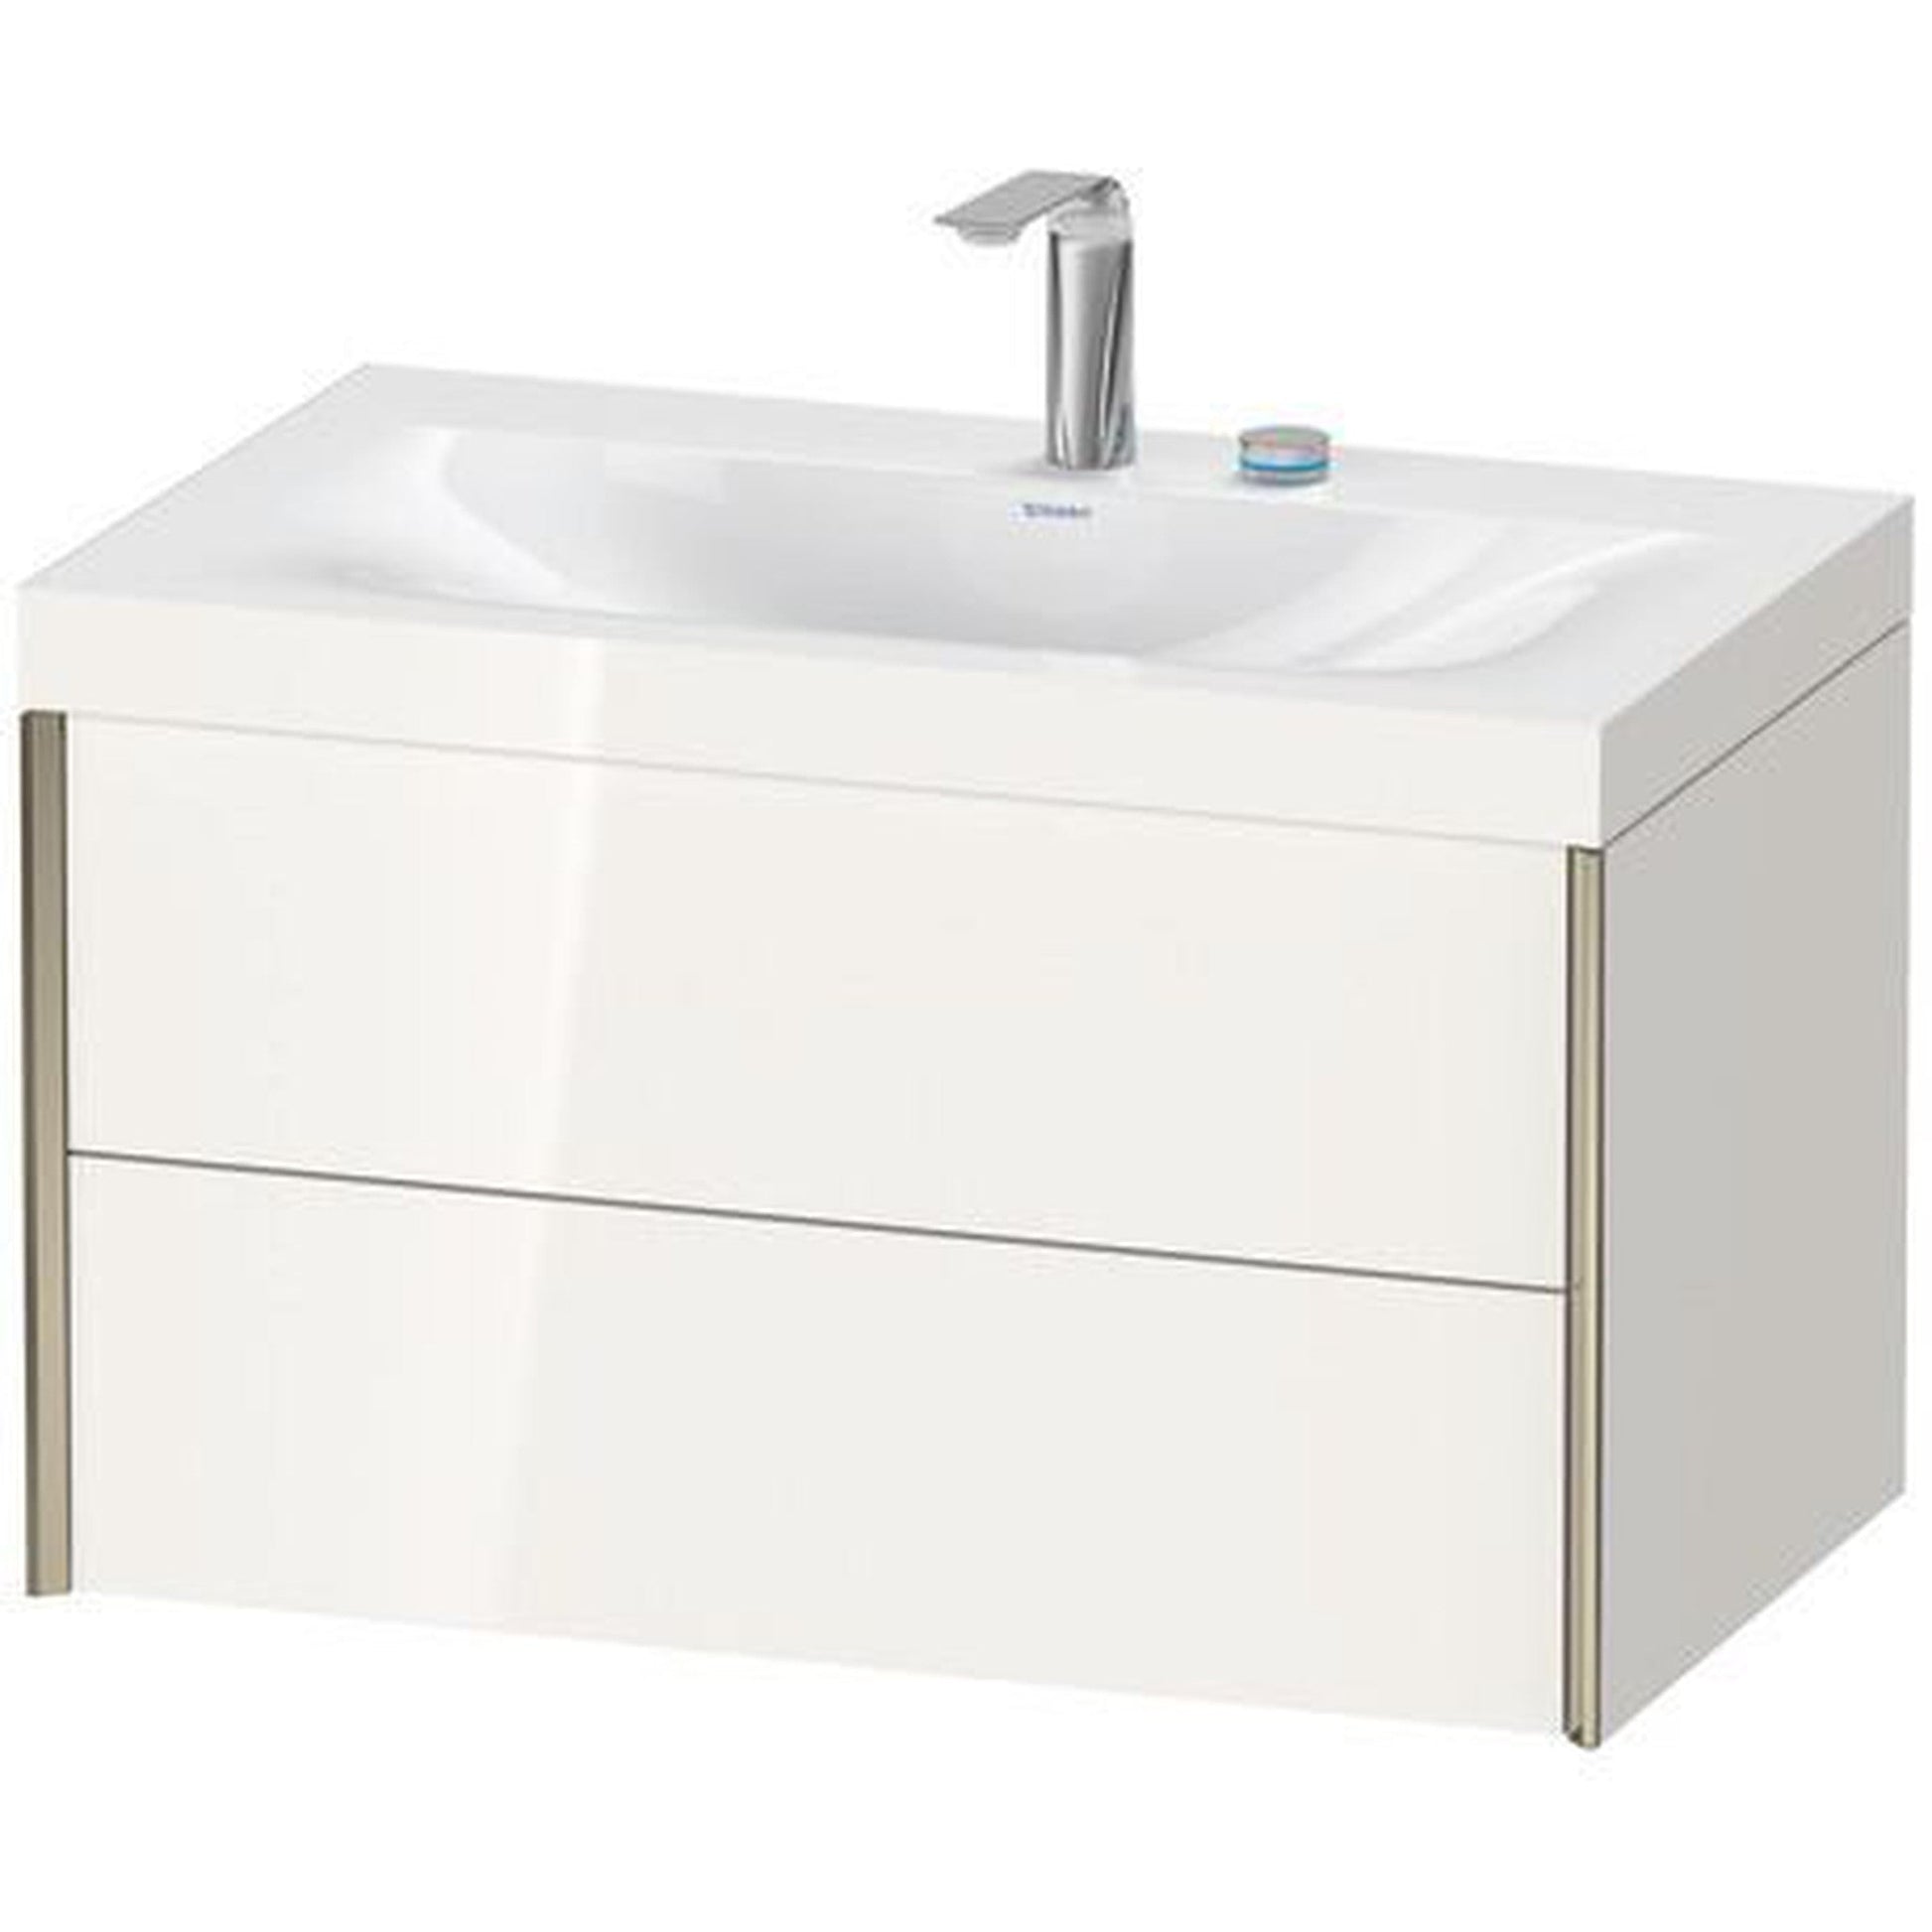 Duravit Xviu 31" x 20" x 19" Two Drawer C-Bonded Wall-Mount Vanity Kit With Two Tap Holes, White (XV4615EB122C)